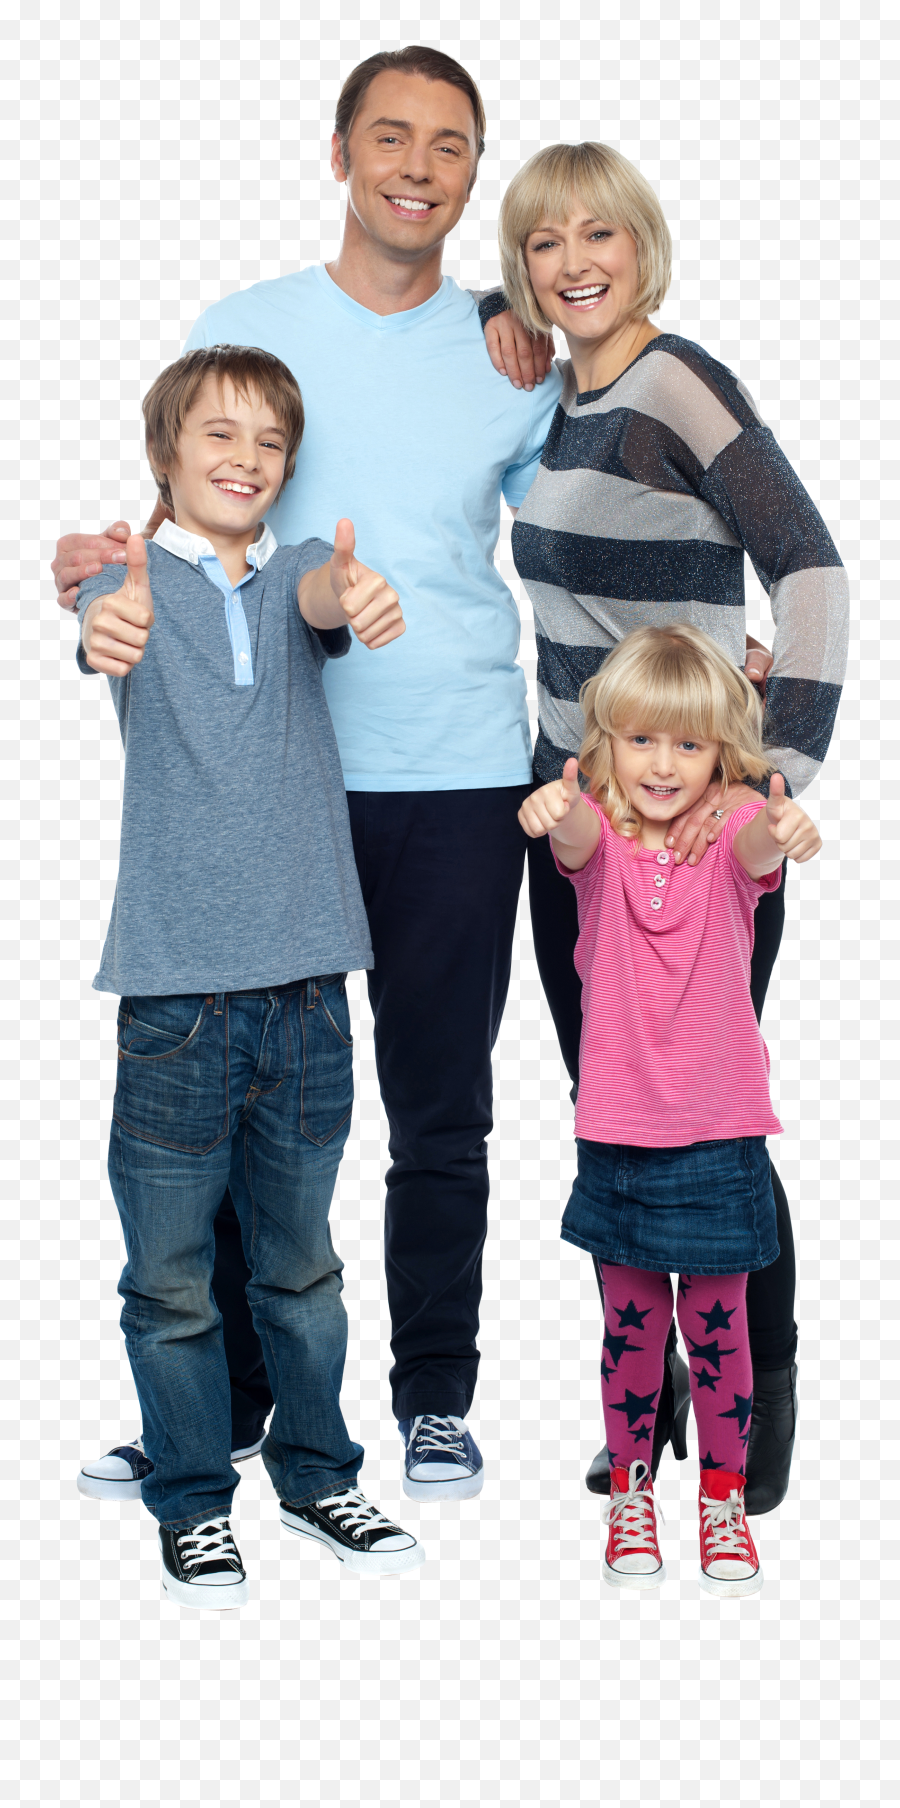 Png Images Transparent Background - Free Family Use,Free Pngs For Commercial Use